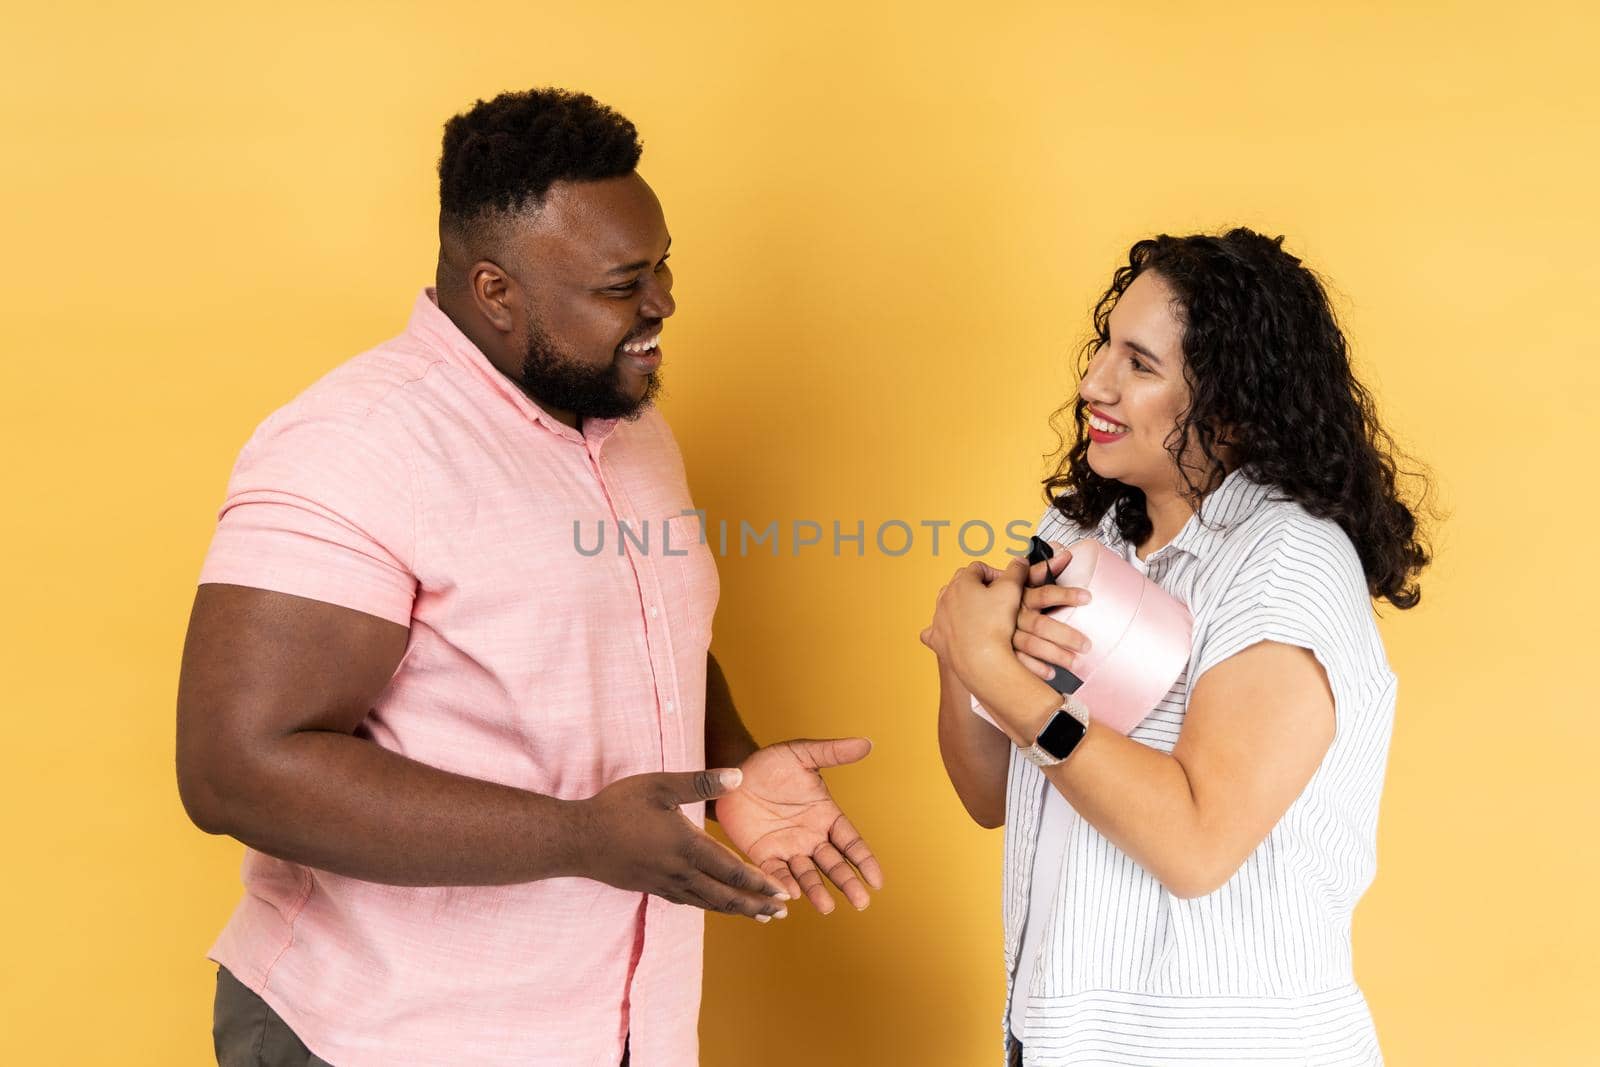 Portrait of happy young couple in casual clothing standing together, woman holding present box, a gift from her husband, celebrating anniversary. Indoor studio shot isolated on yellow background.